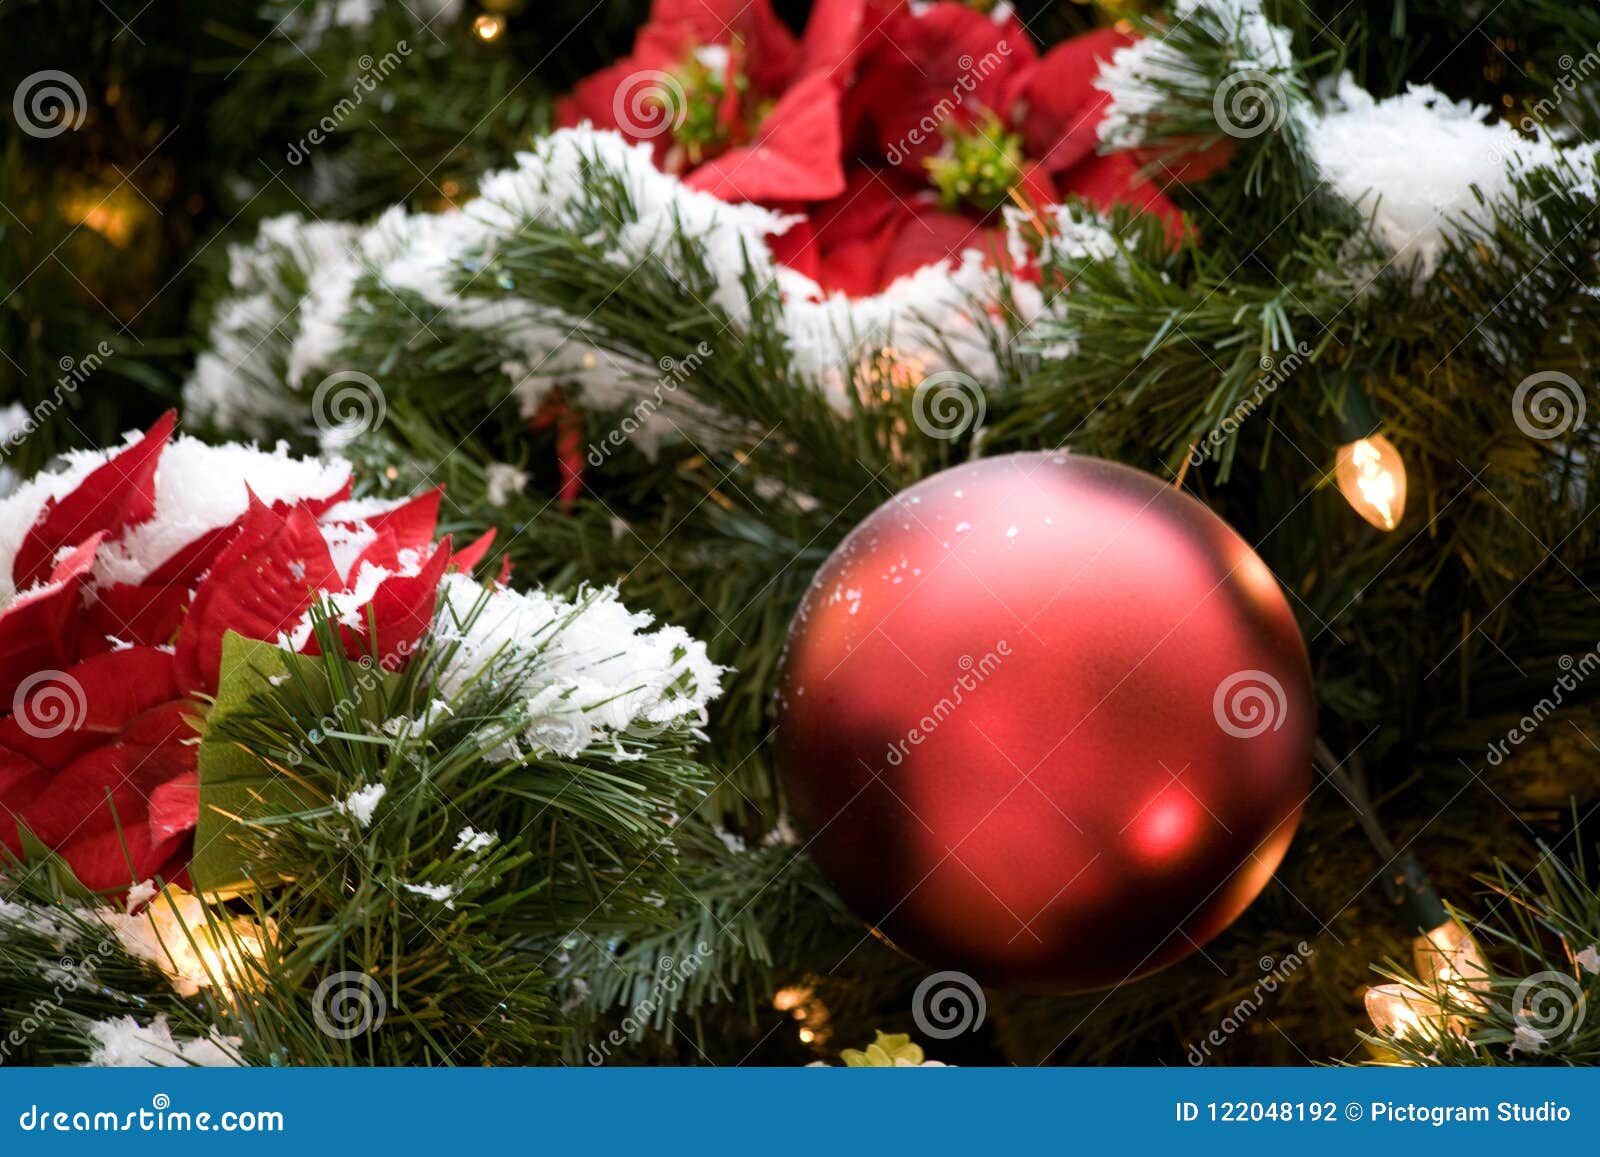 Winter Holiday Christmas Tree with Red Ornaments, Lights, Pointsettas ...